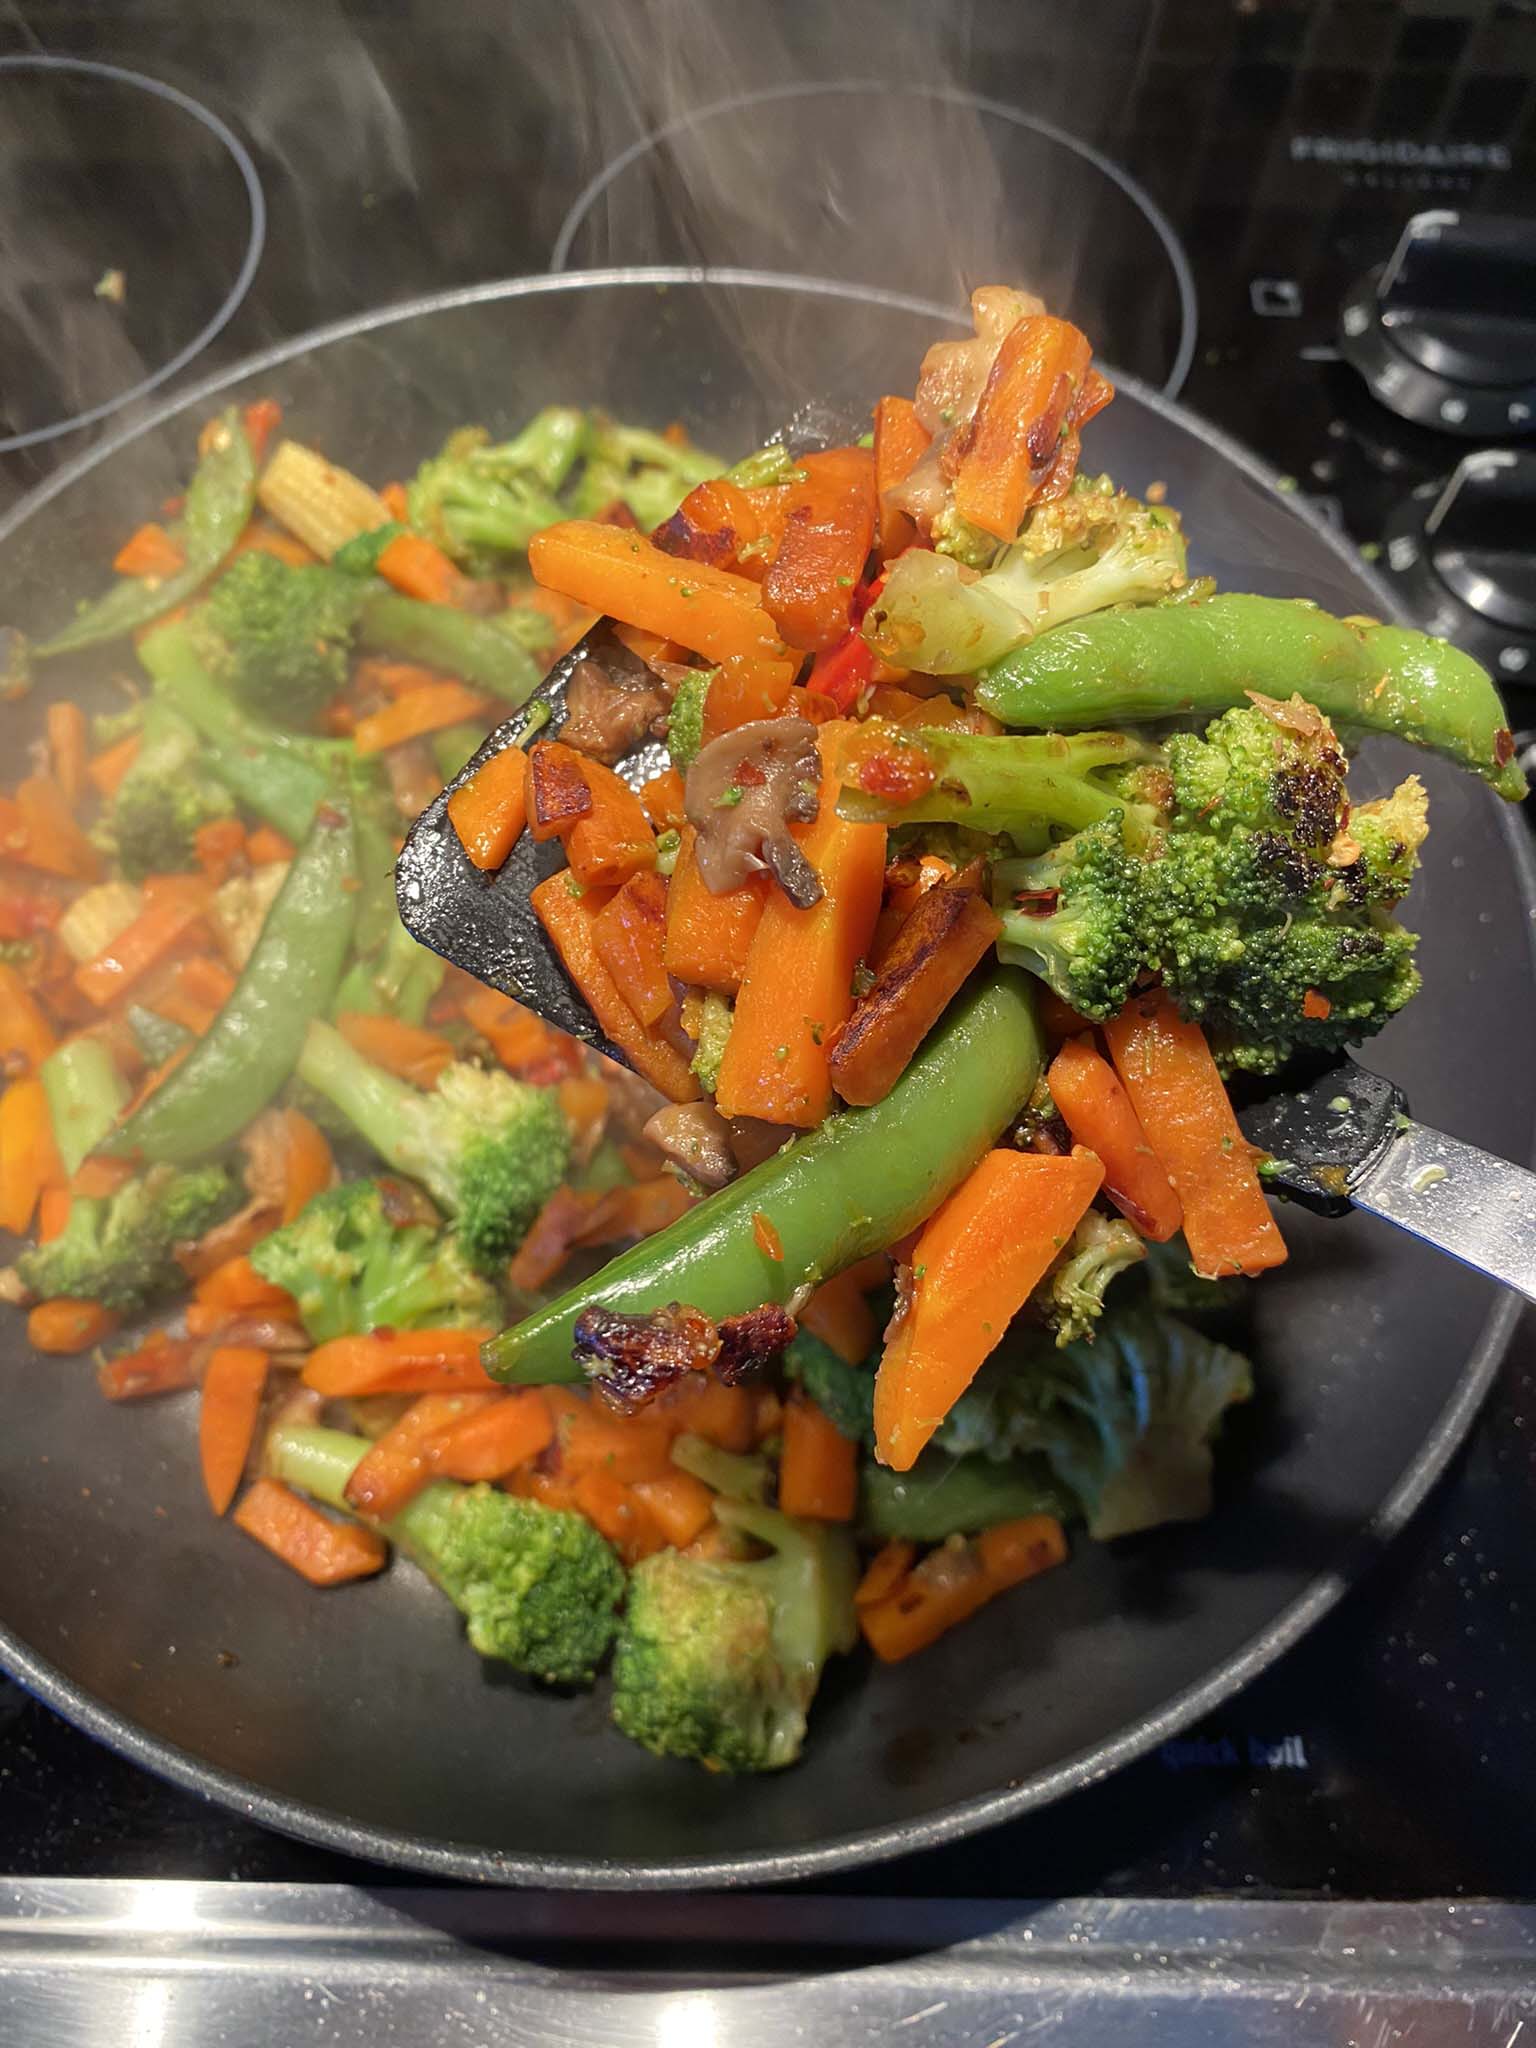 Sauteed vegetables in a frying pan.